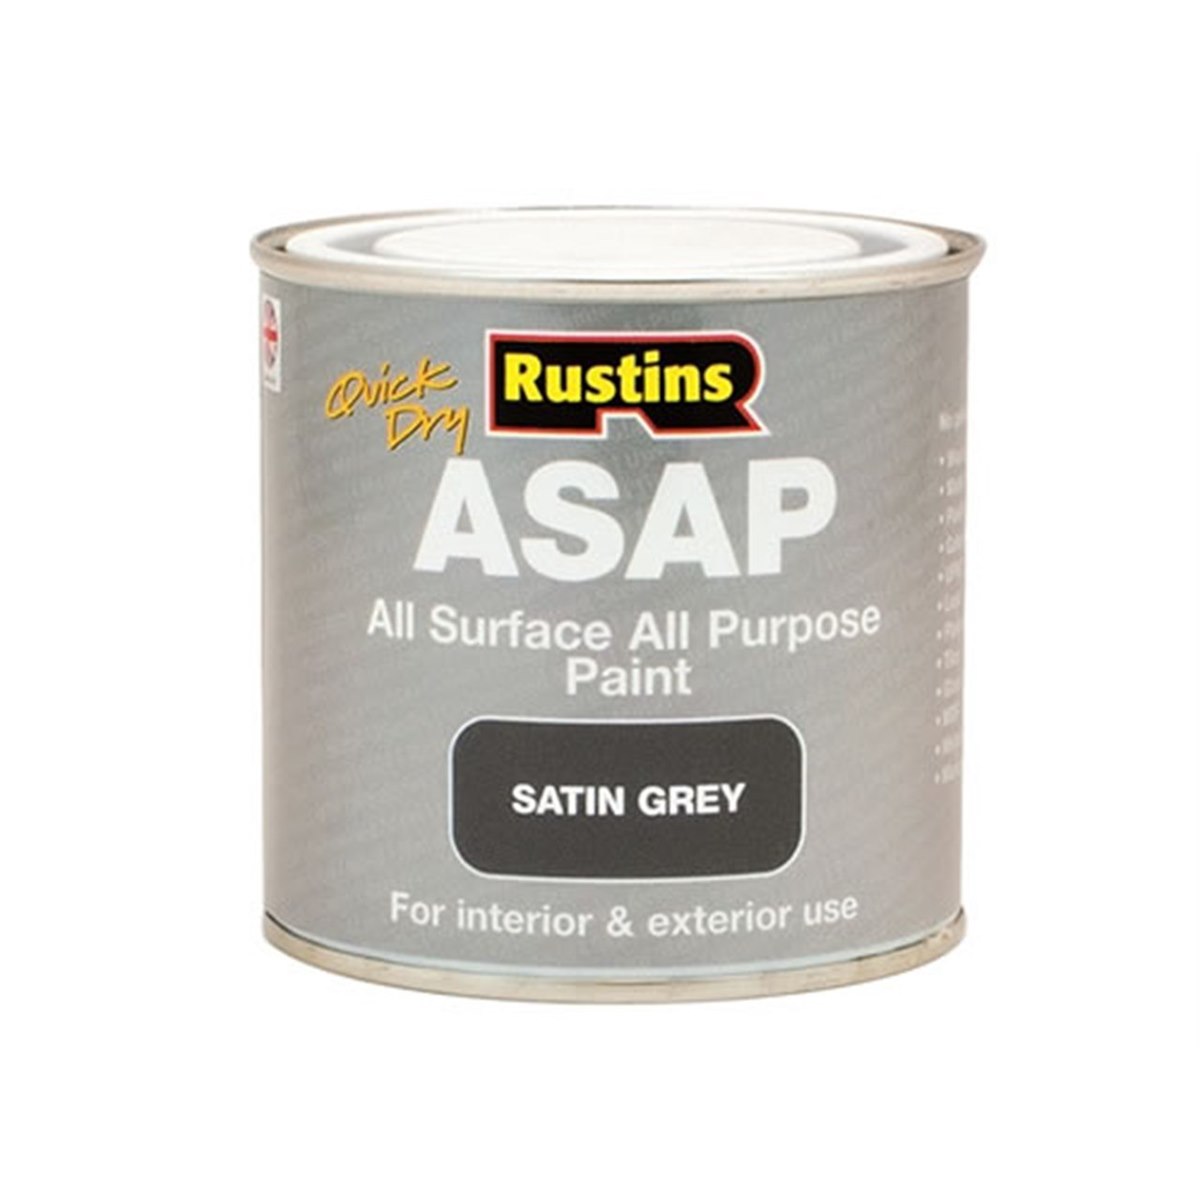 Rustins Quick Dry All Surface All Purpose Paint (ASAP) Grey 250ml